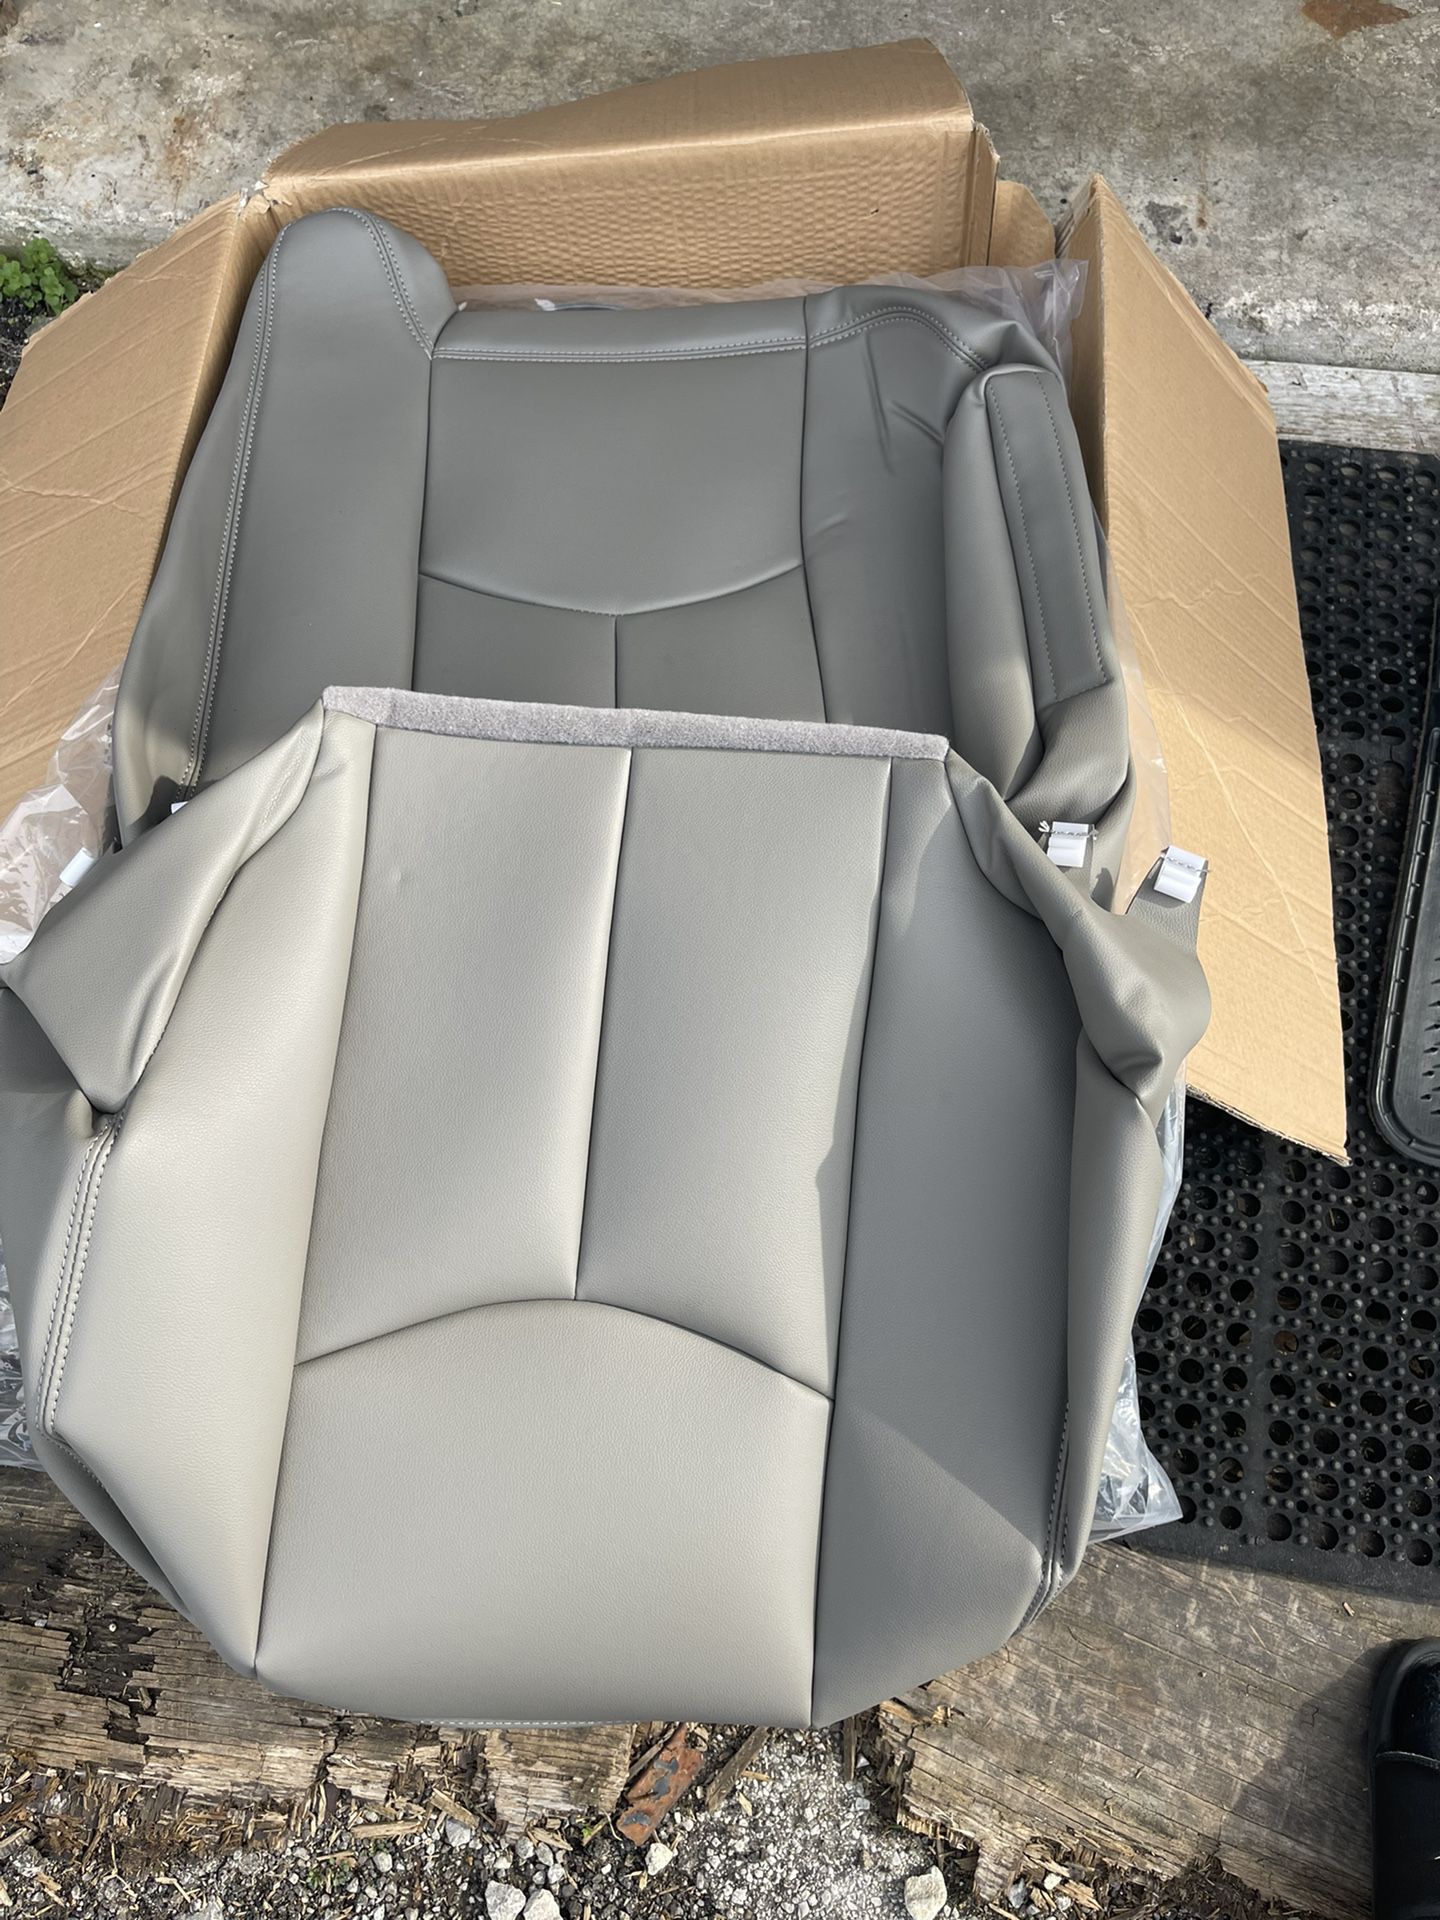 Genuine Replacement Factory Seats Covers